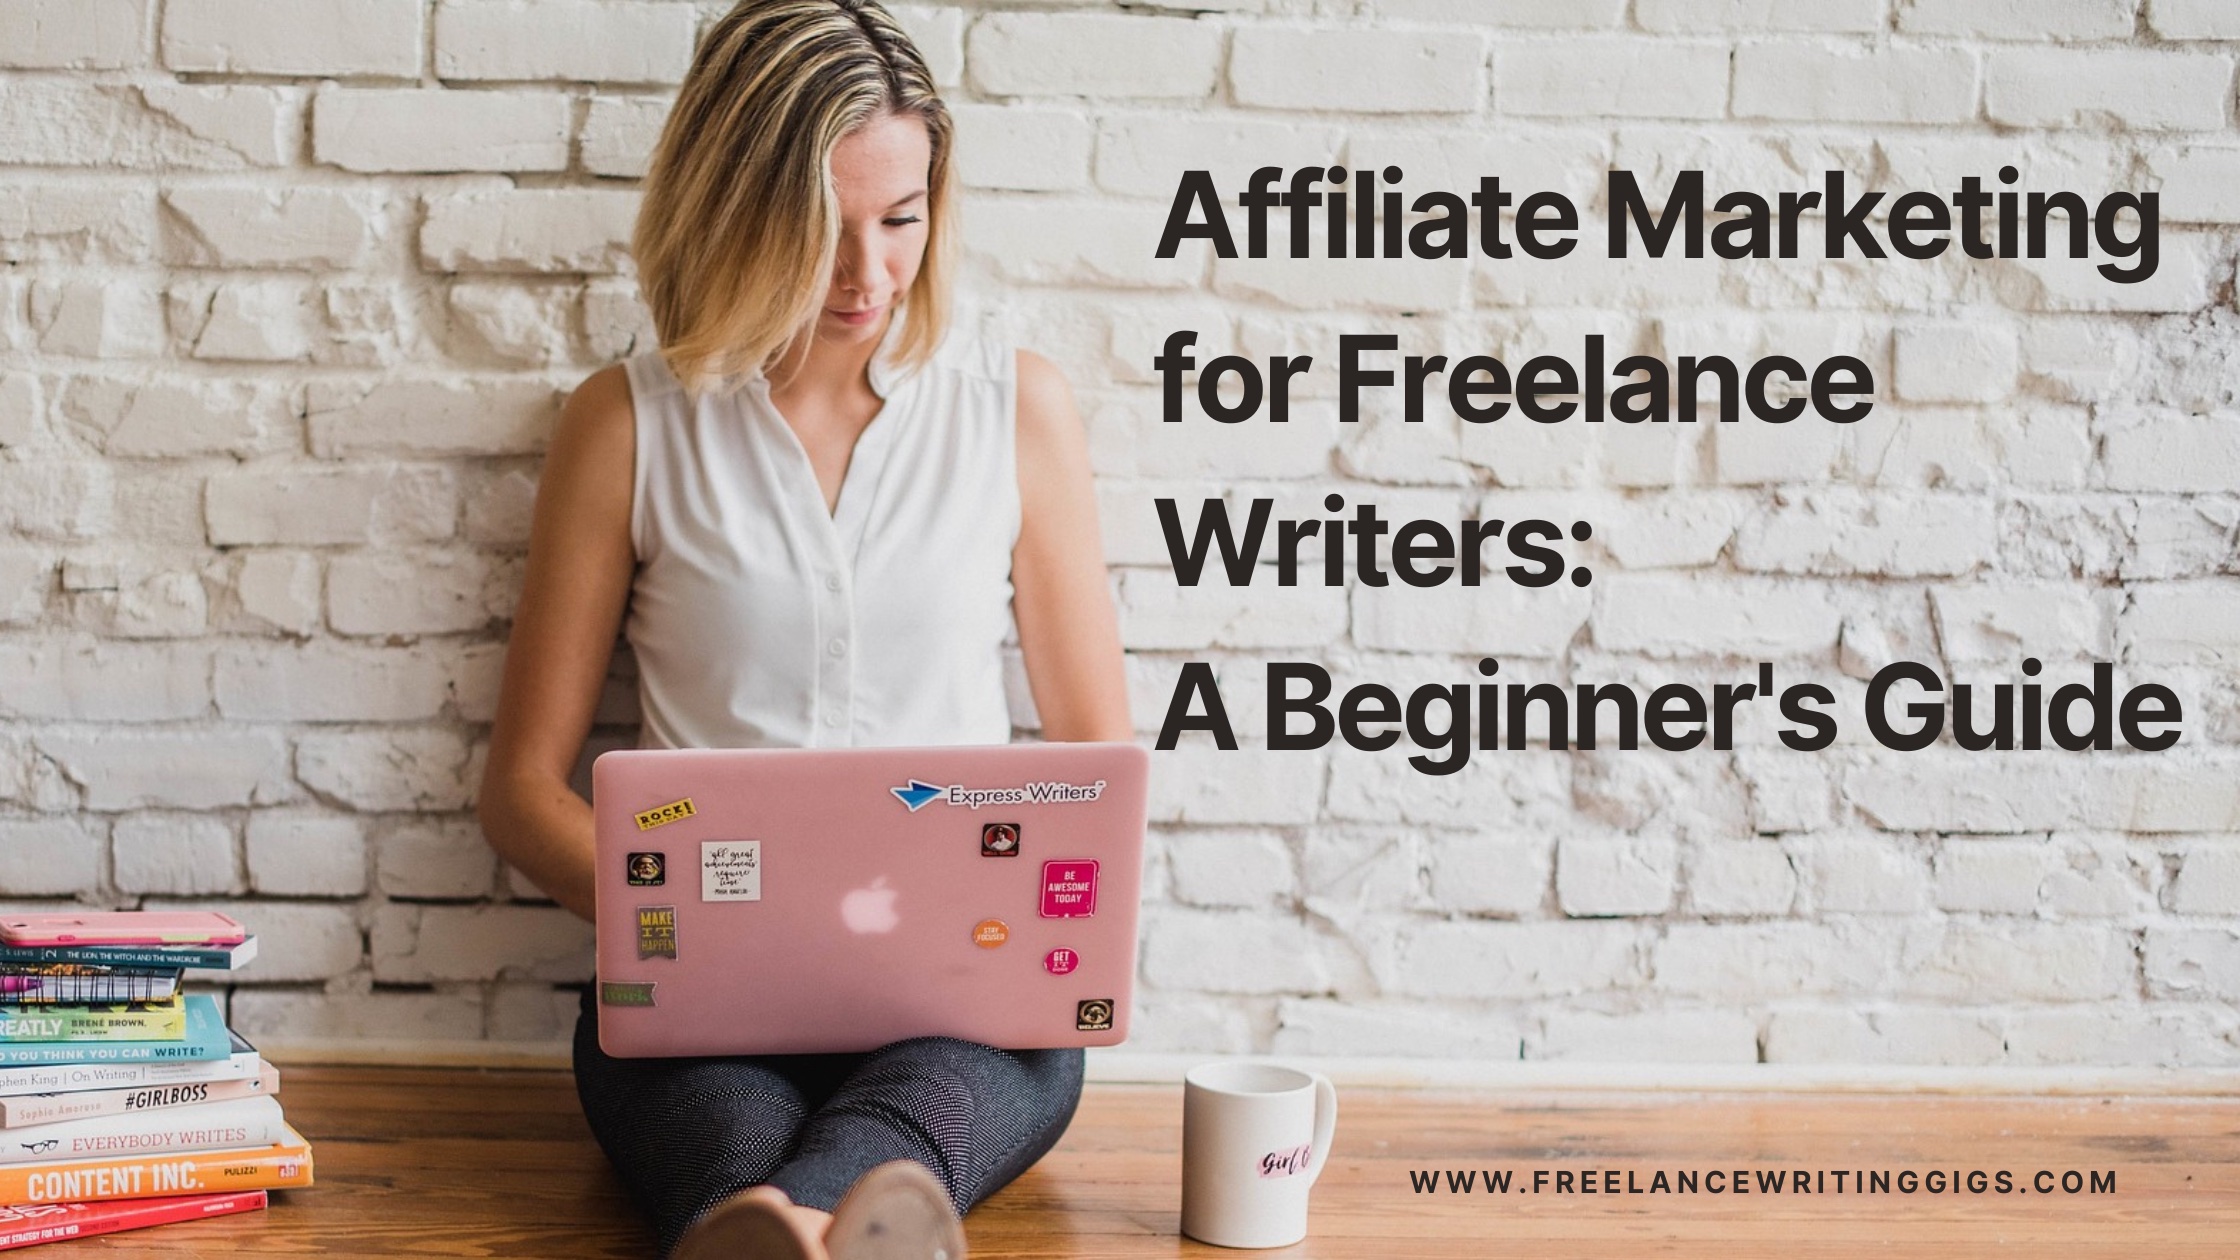 Affiliate Marketing for Freelance Writers: A Beginner’s Guide